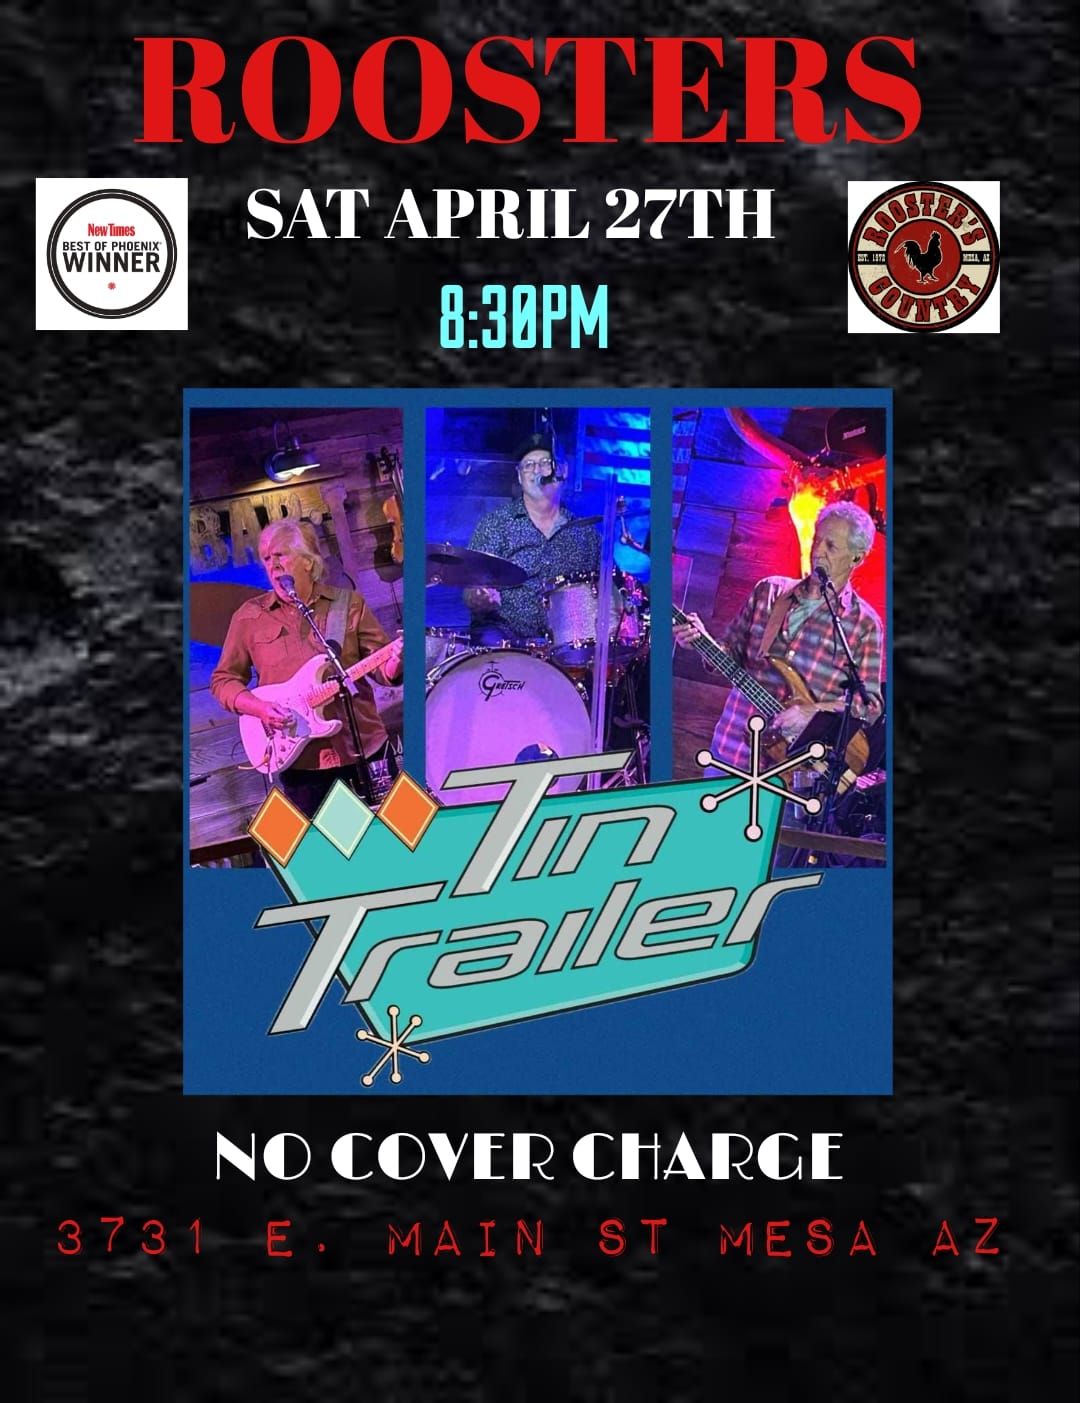 THE TIN TRAILER BAND @ ROOSTERS 